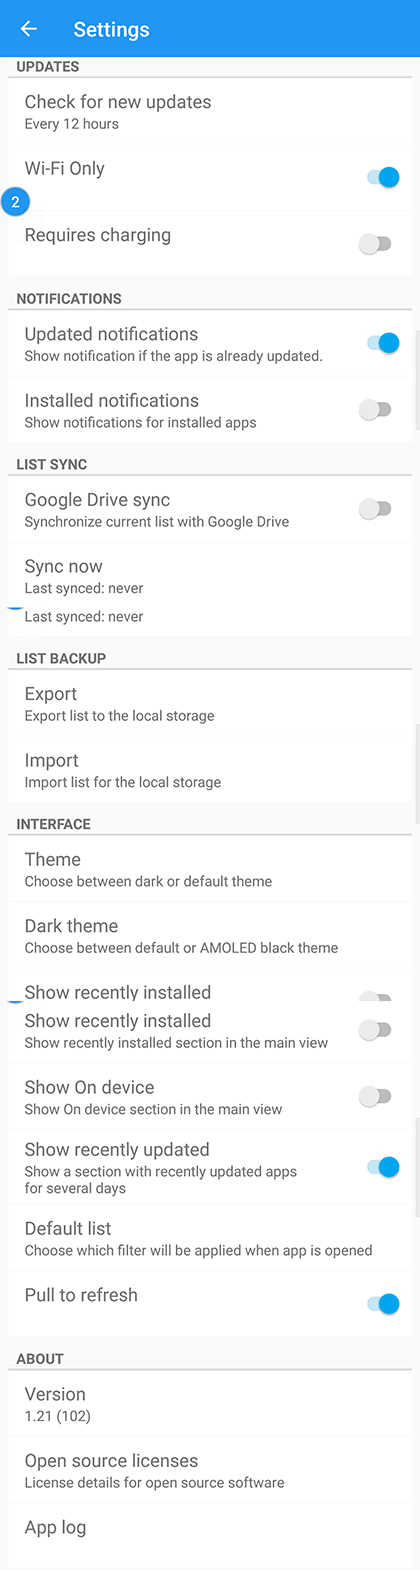 Android app watcher settings